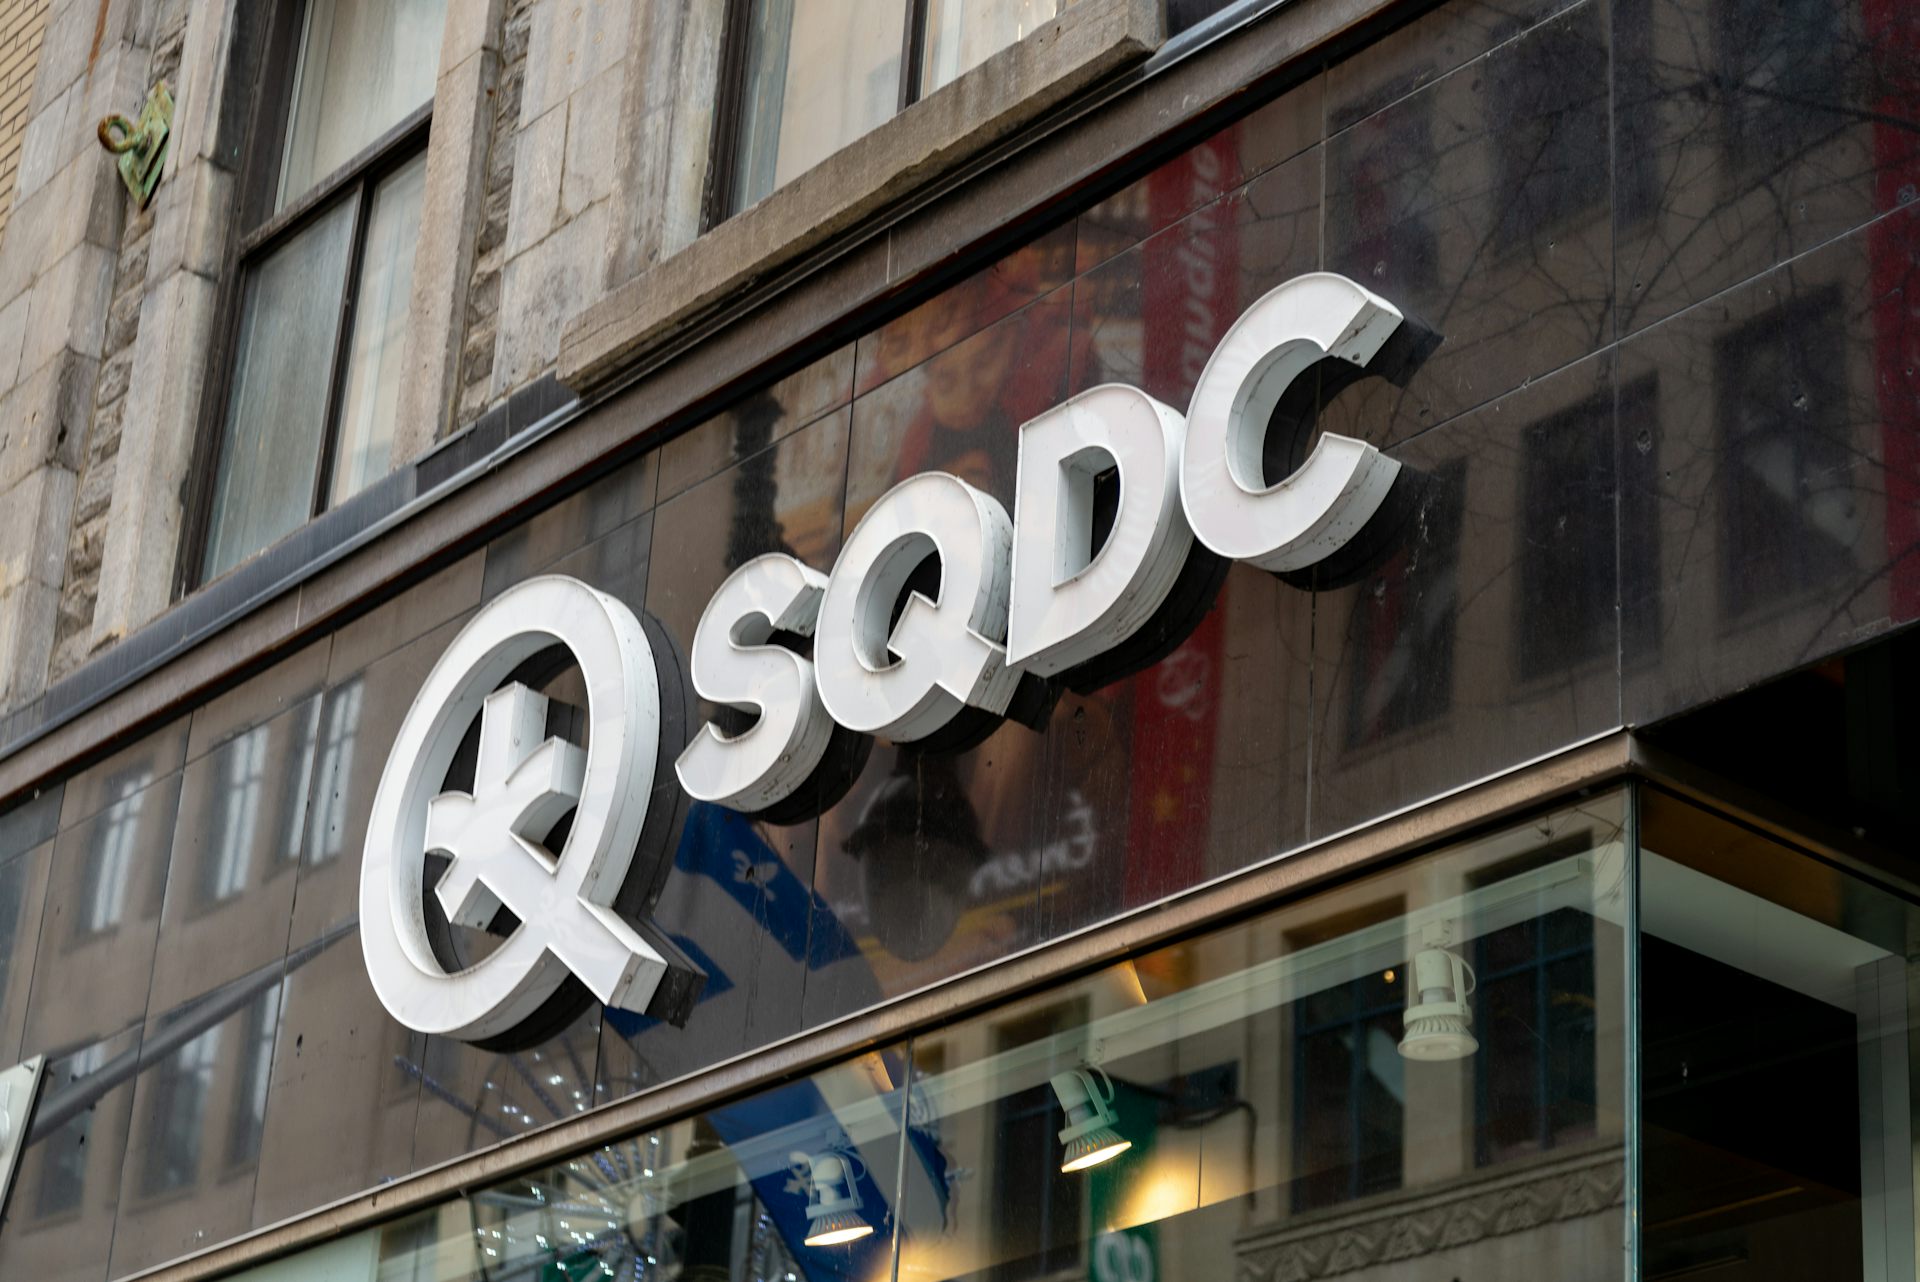 SQDC logo on the outside of a store